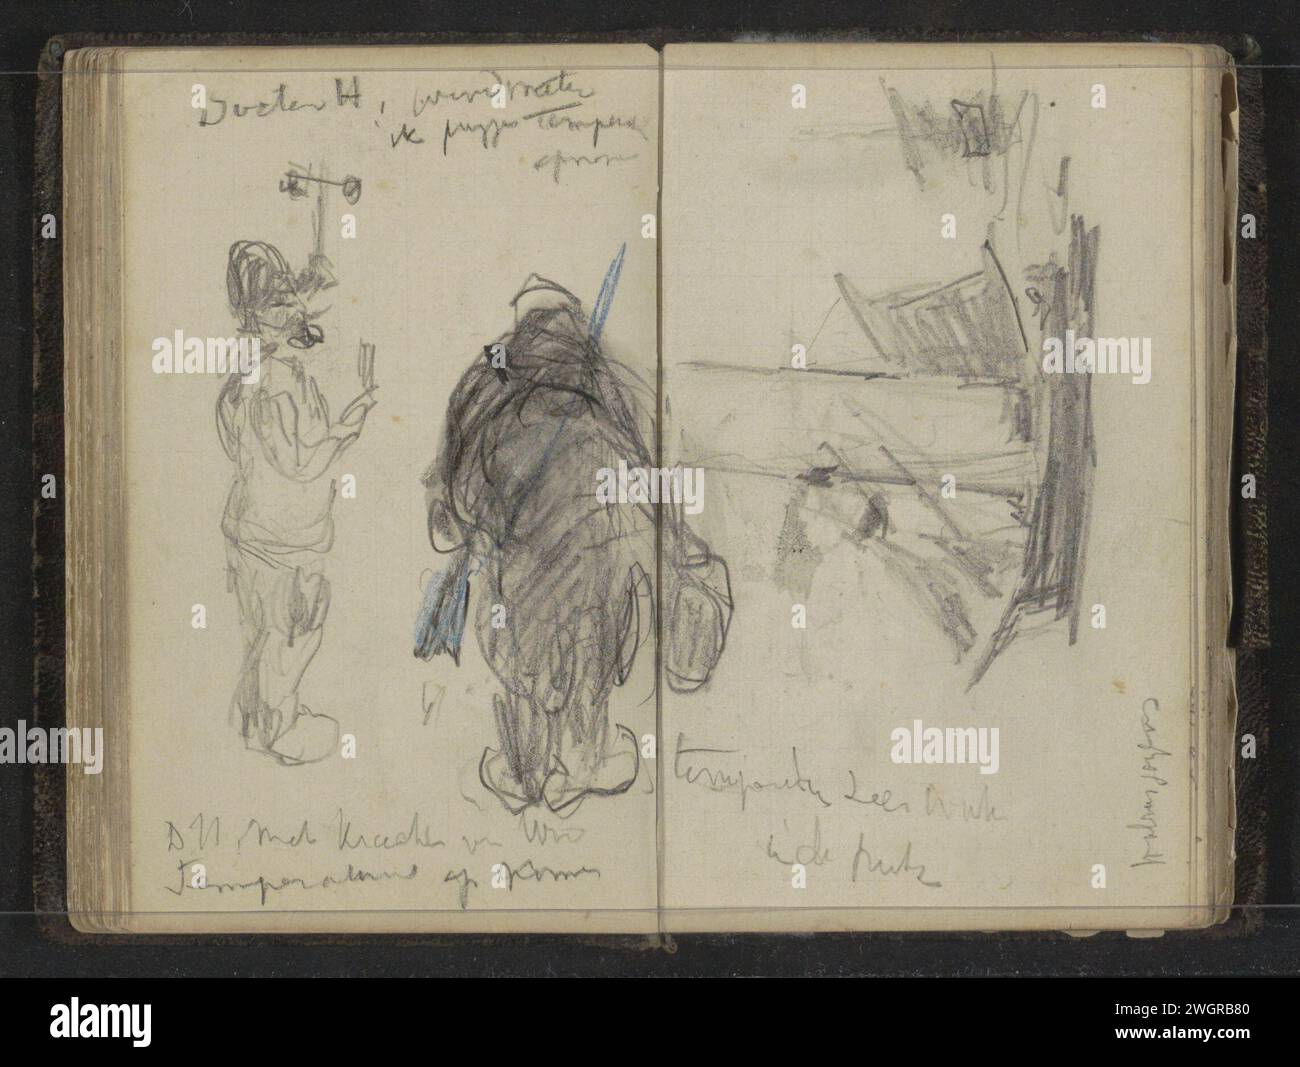 Dr. Hamaker during his work and Walrusjagers, 1880  On the left, Hamaker is busy with wind and temperature meters. Right walrus hunters at sea. Page 46 Verso and Page 47 Recto from a sketchbook with 110 sheets meant during the expedition to Nova Zembla in 1880. Hammerfest (Possibly) pencil. chalk  measuring-instruments (+ scholar, scientist (at work)). sailing-ship, sailing-boat Norwegian Sea Stock Photo